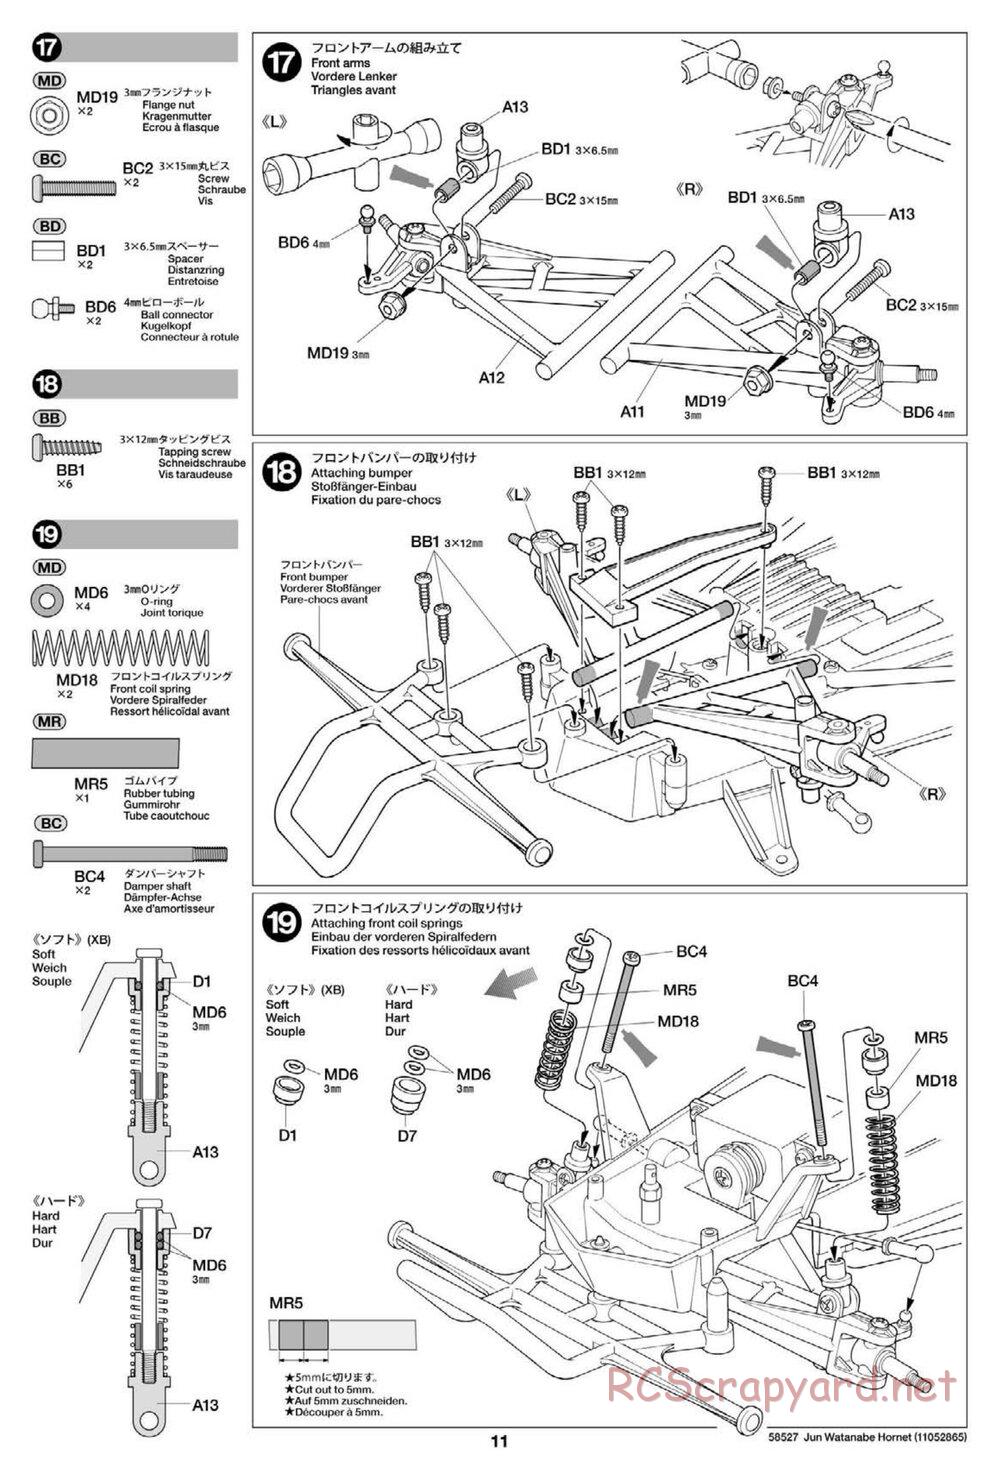 Tamiya - The Hornet by Jun Watanabe - GH Chassis - Manual - Page 11